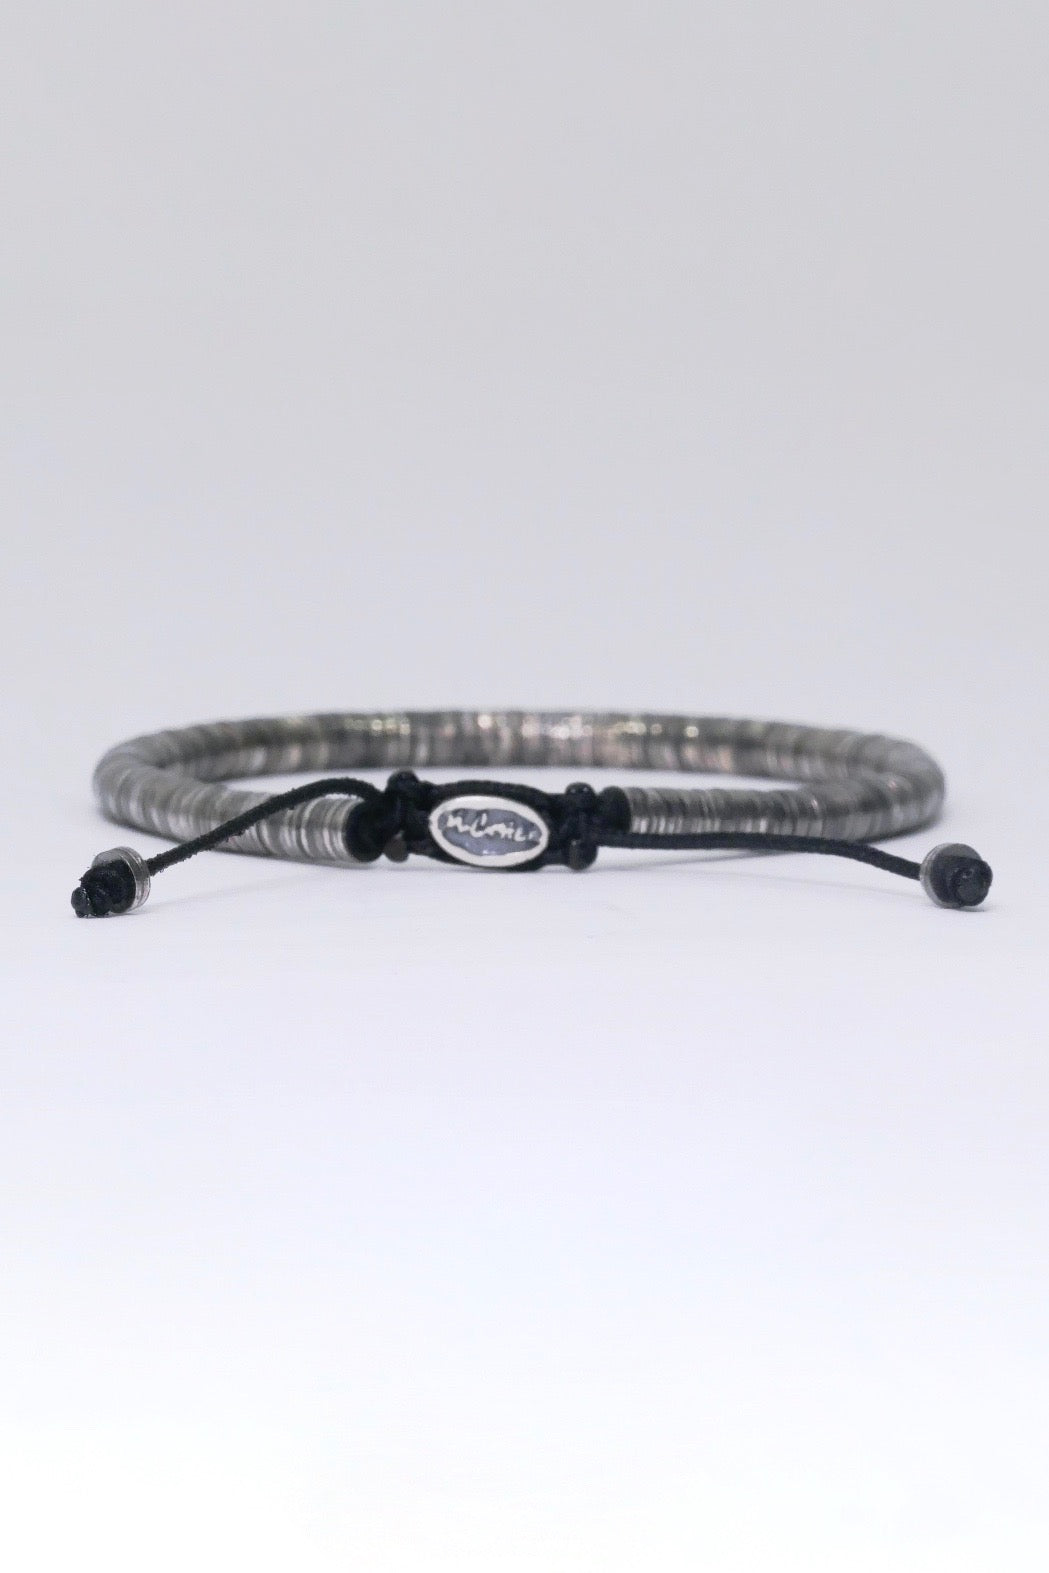 M.Cohen by MAOR Stacked Carved Oxidized Disc Bracelet - Silver